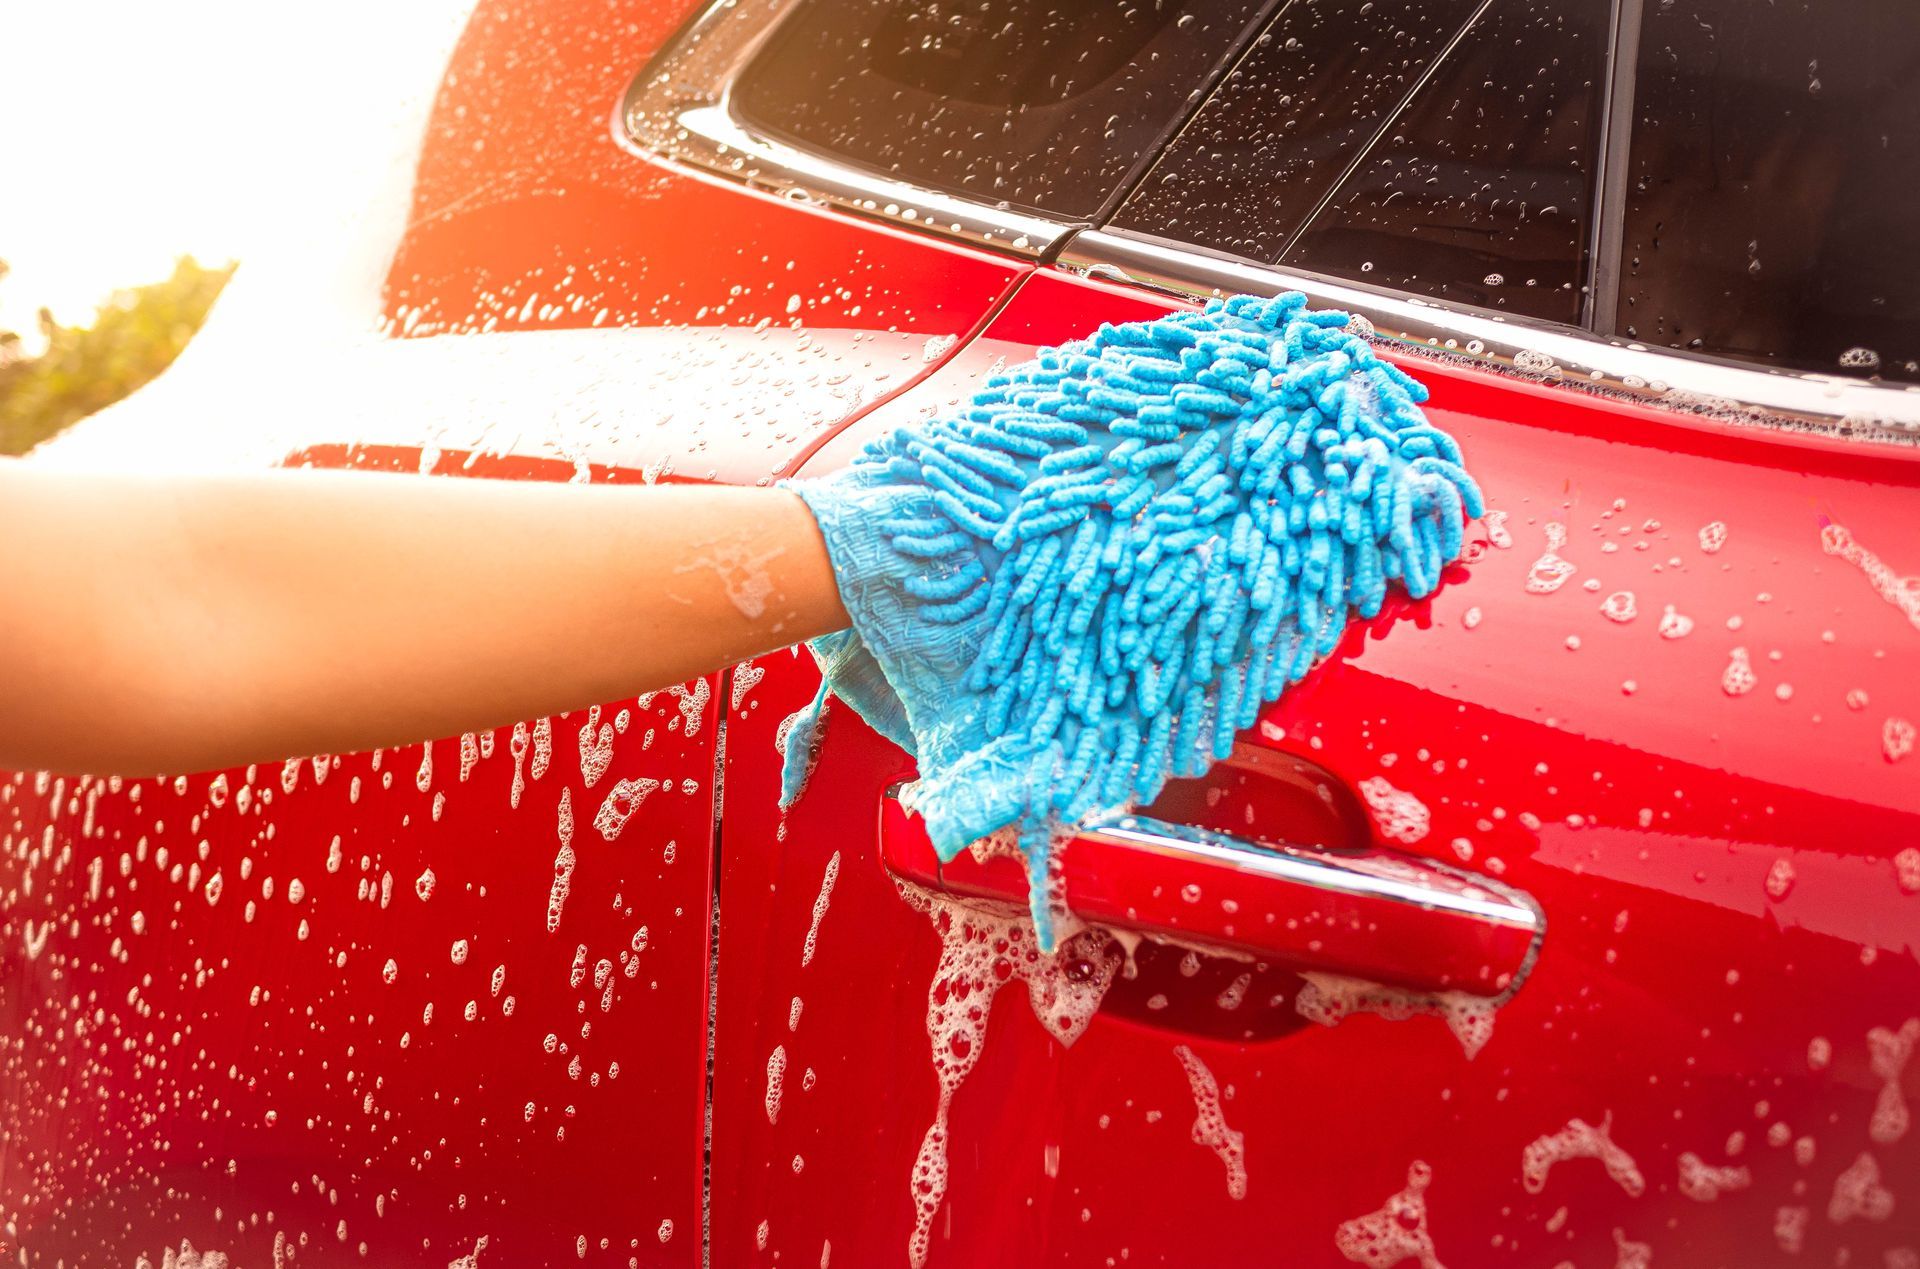 Person washing a red car